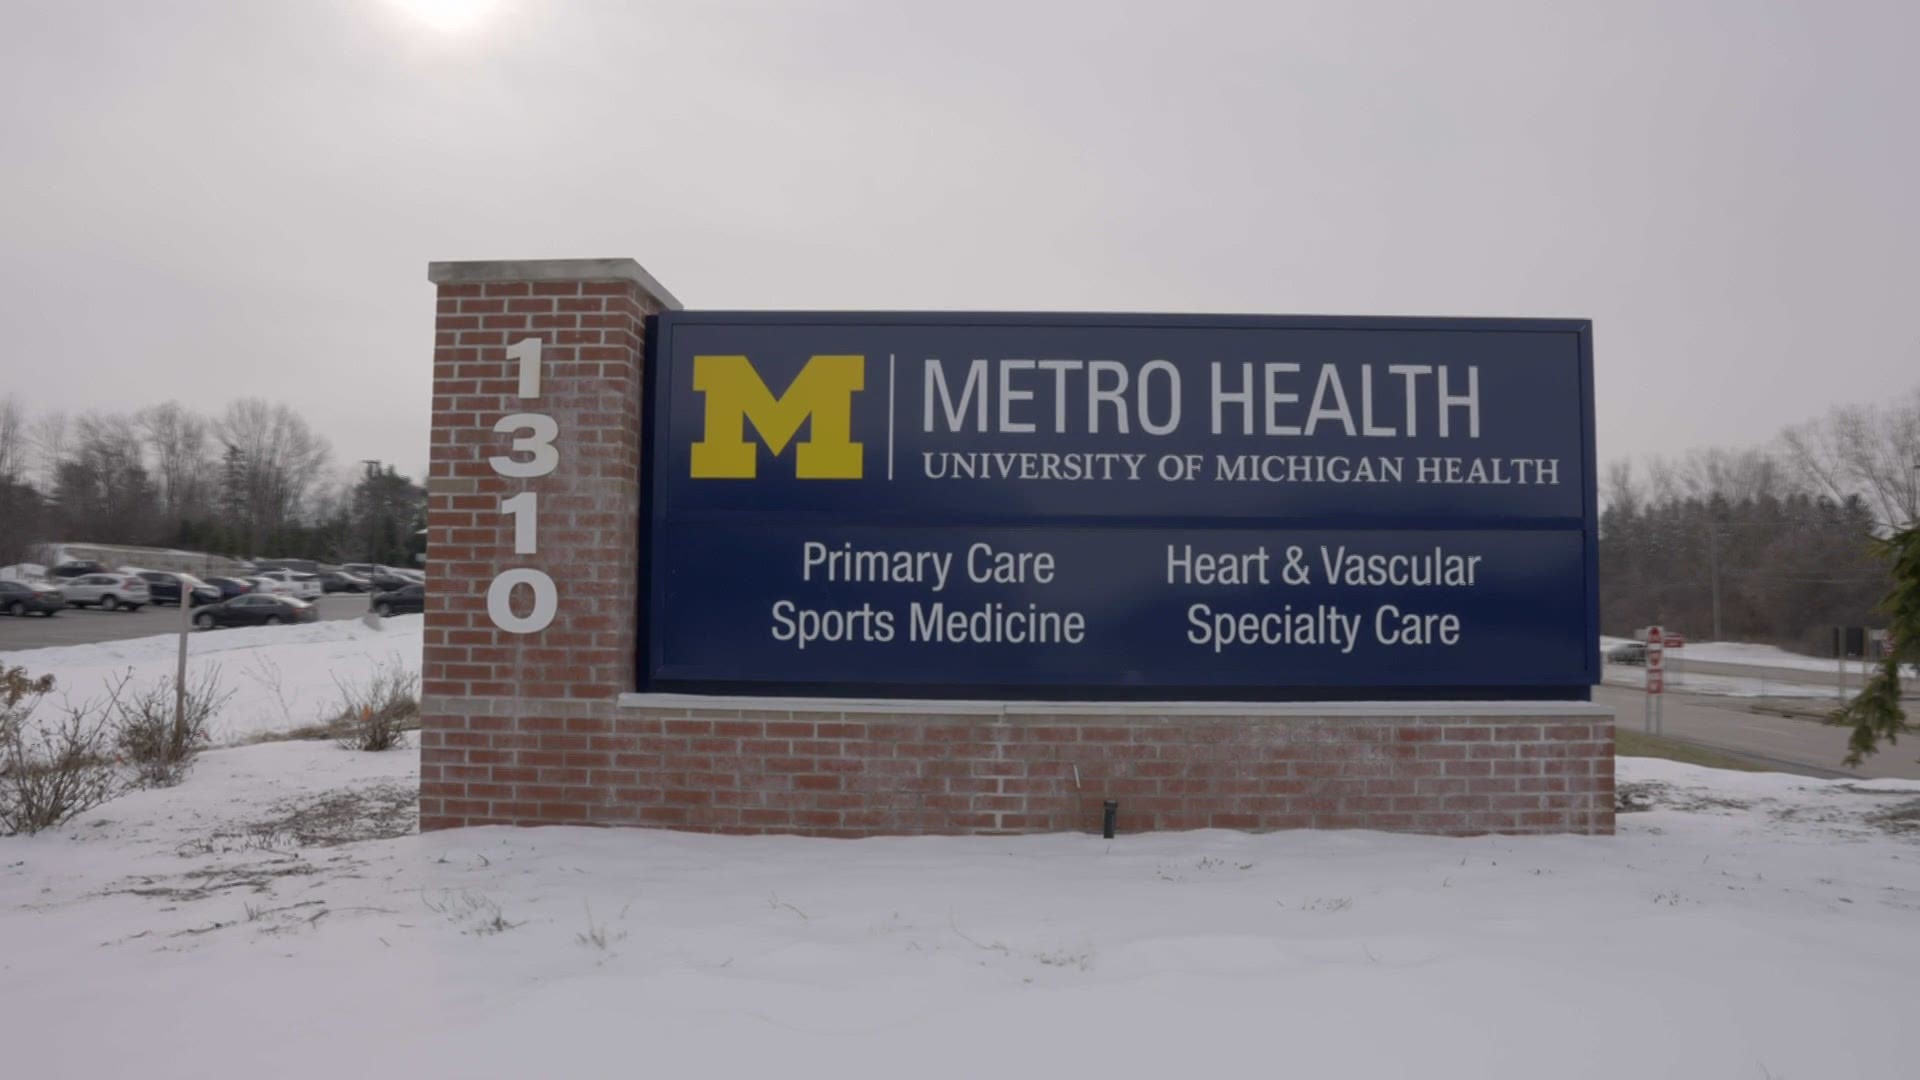 Metro Health’s newest outpatient office is now open, bringing more services to that area.